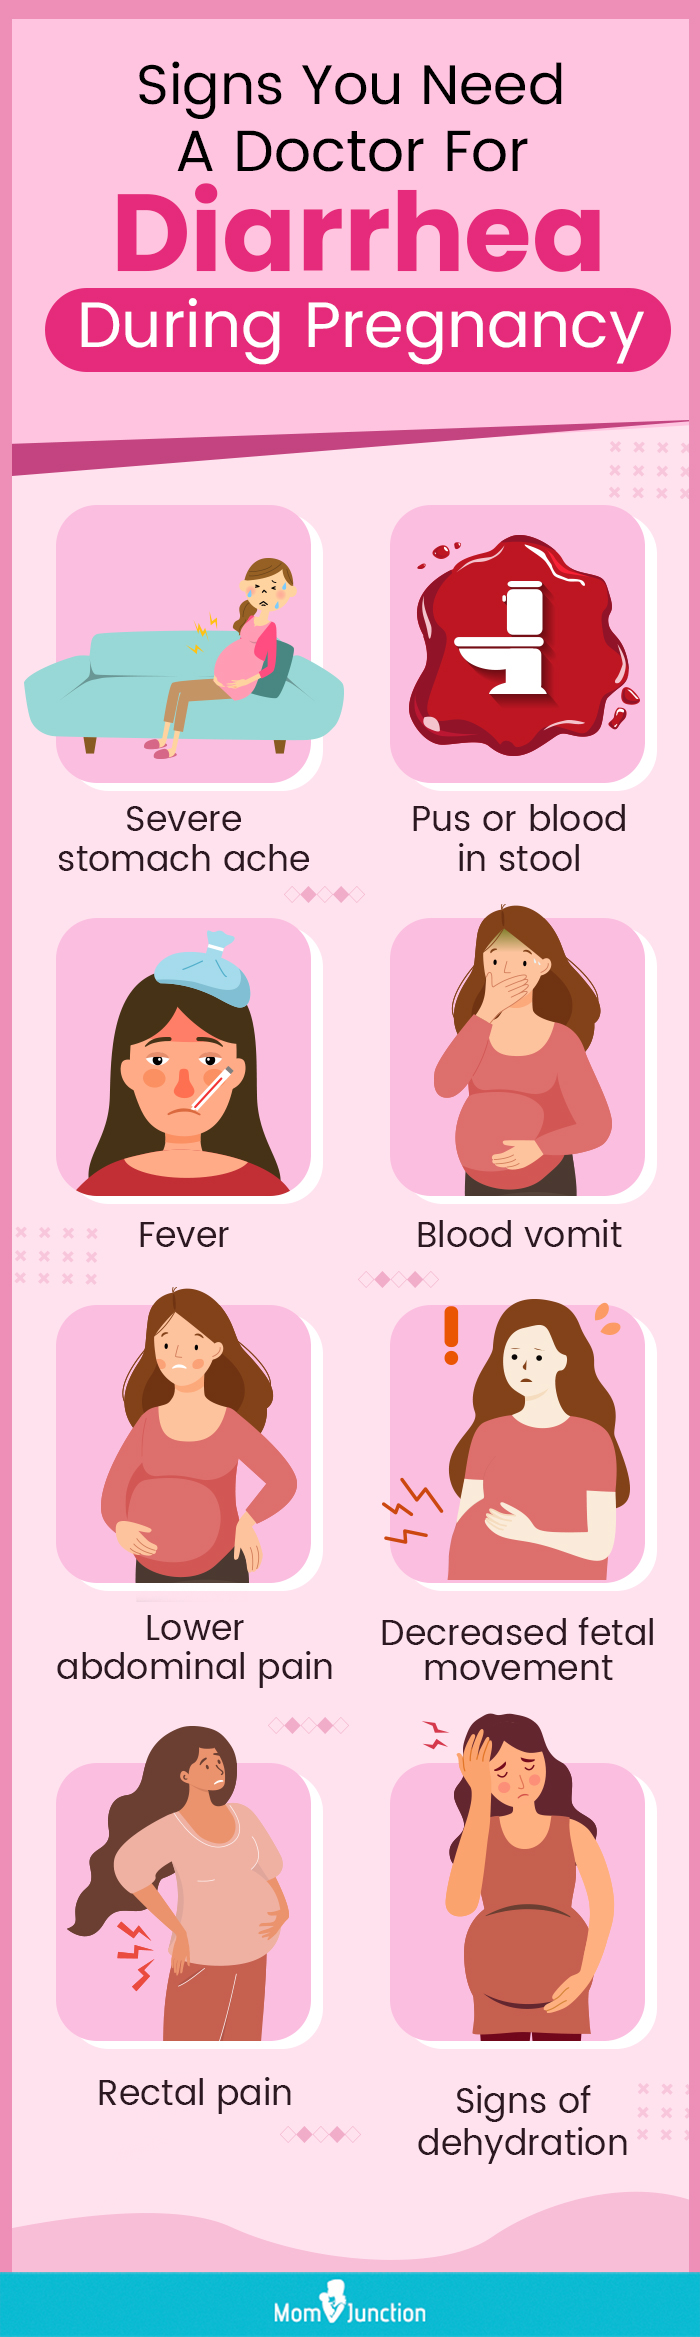 signs you need a doctor for diarrhea during pregnancy (infographic)